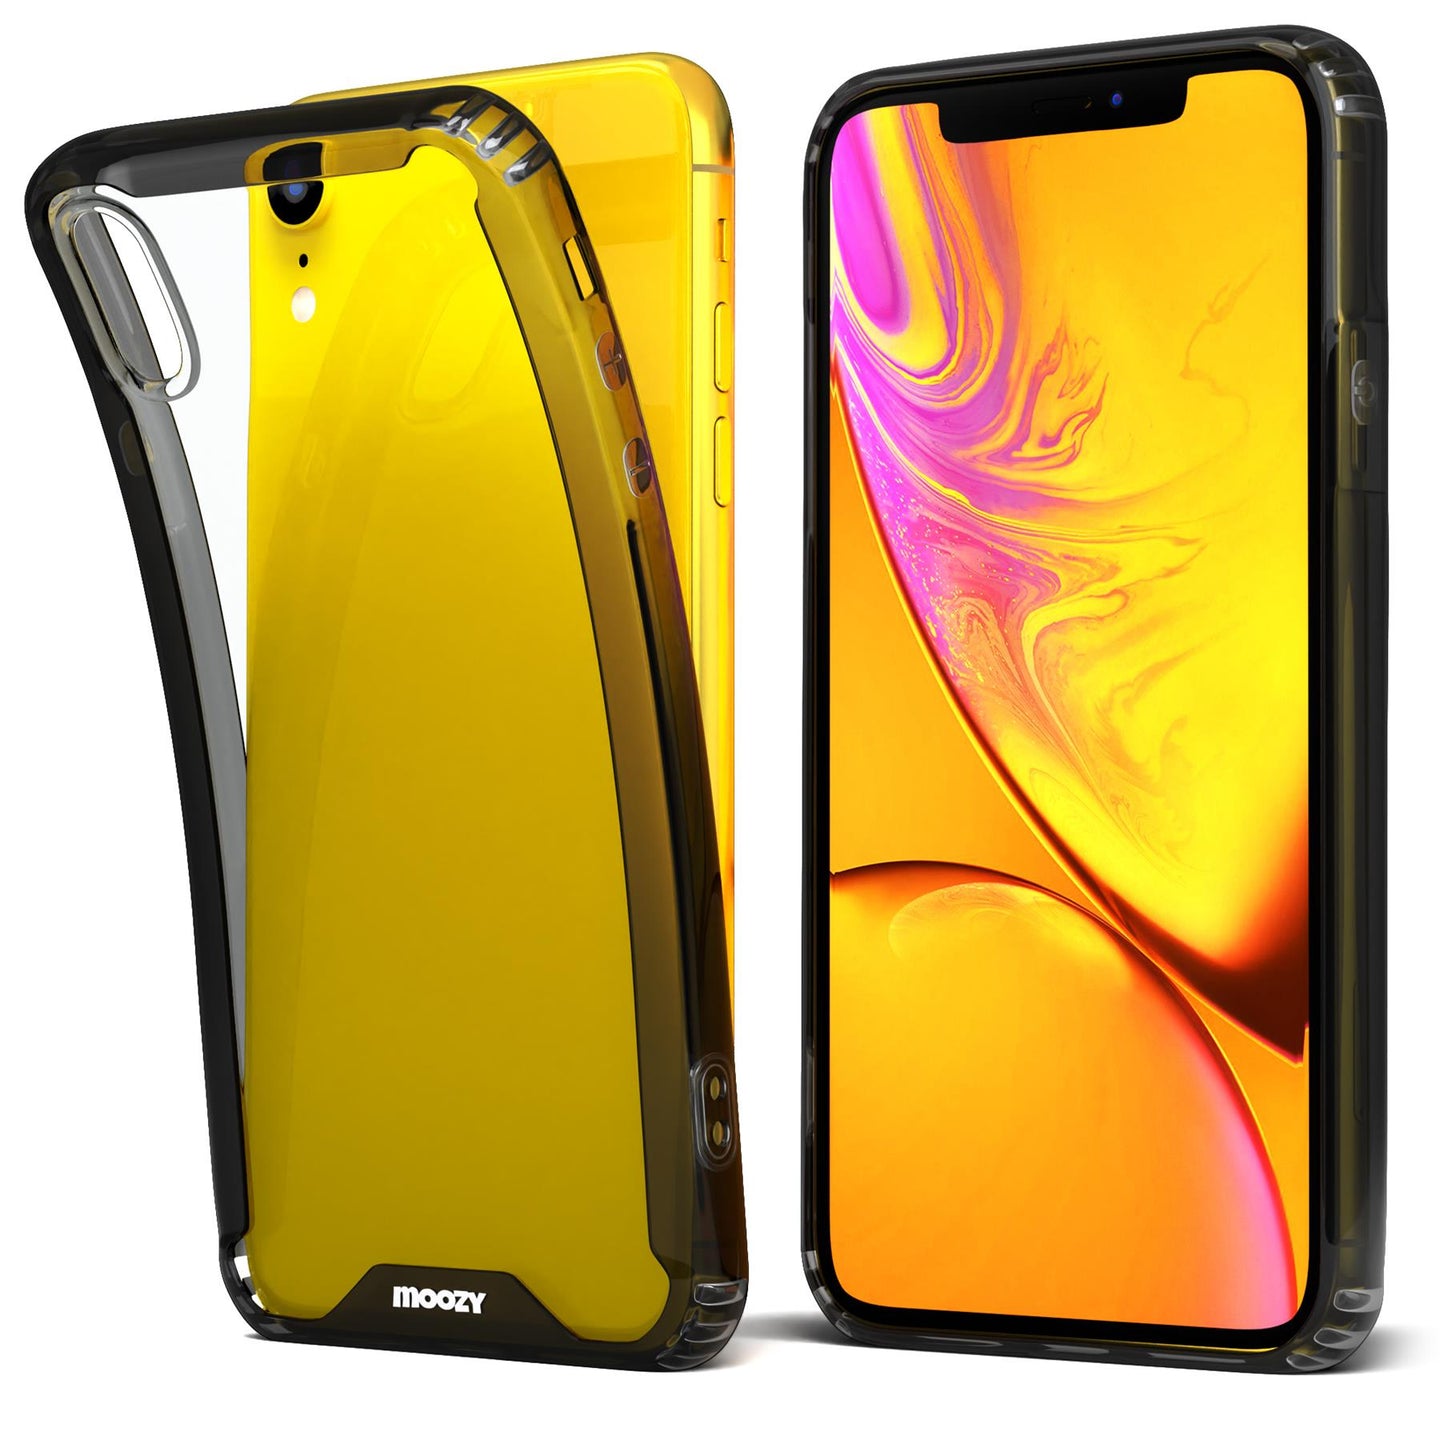 Moozy Xframe Shockproof Case for iPhone XR - Black Rim Transparent Case, Double Colour Clear Hybrid Cover with Shock Absorbing TPU Rim